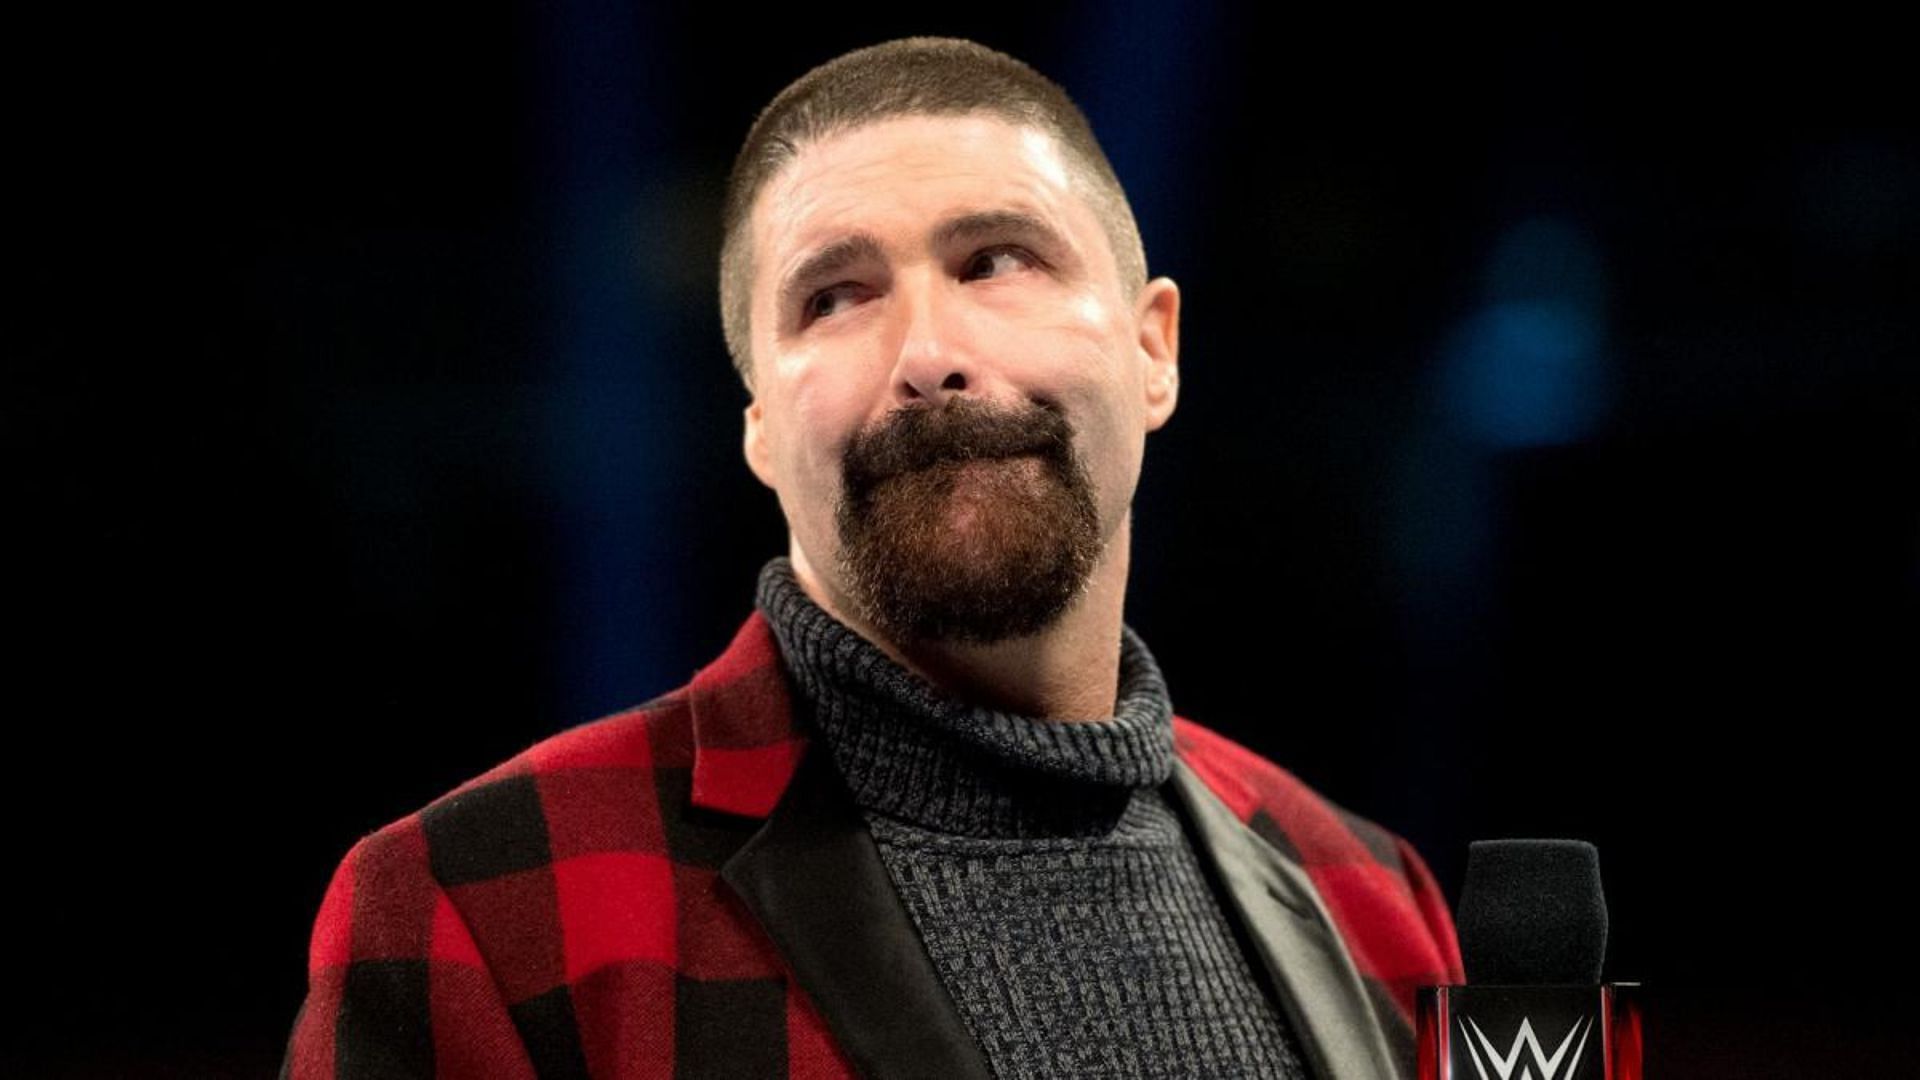 A top female WWE star sought the advice of Mick Foley